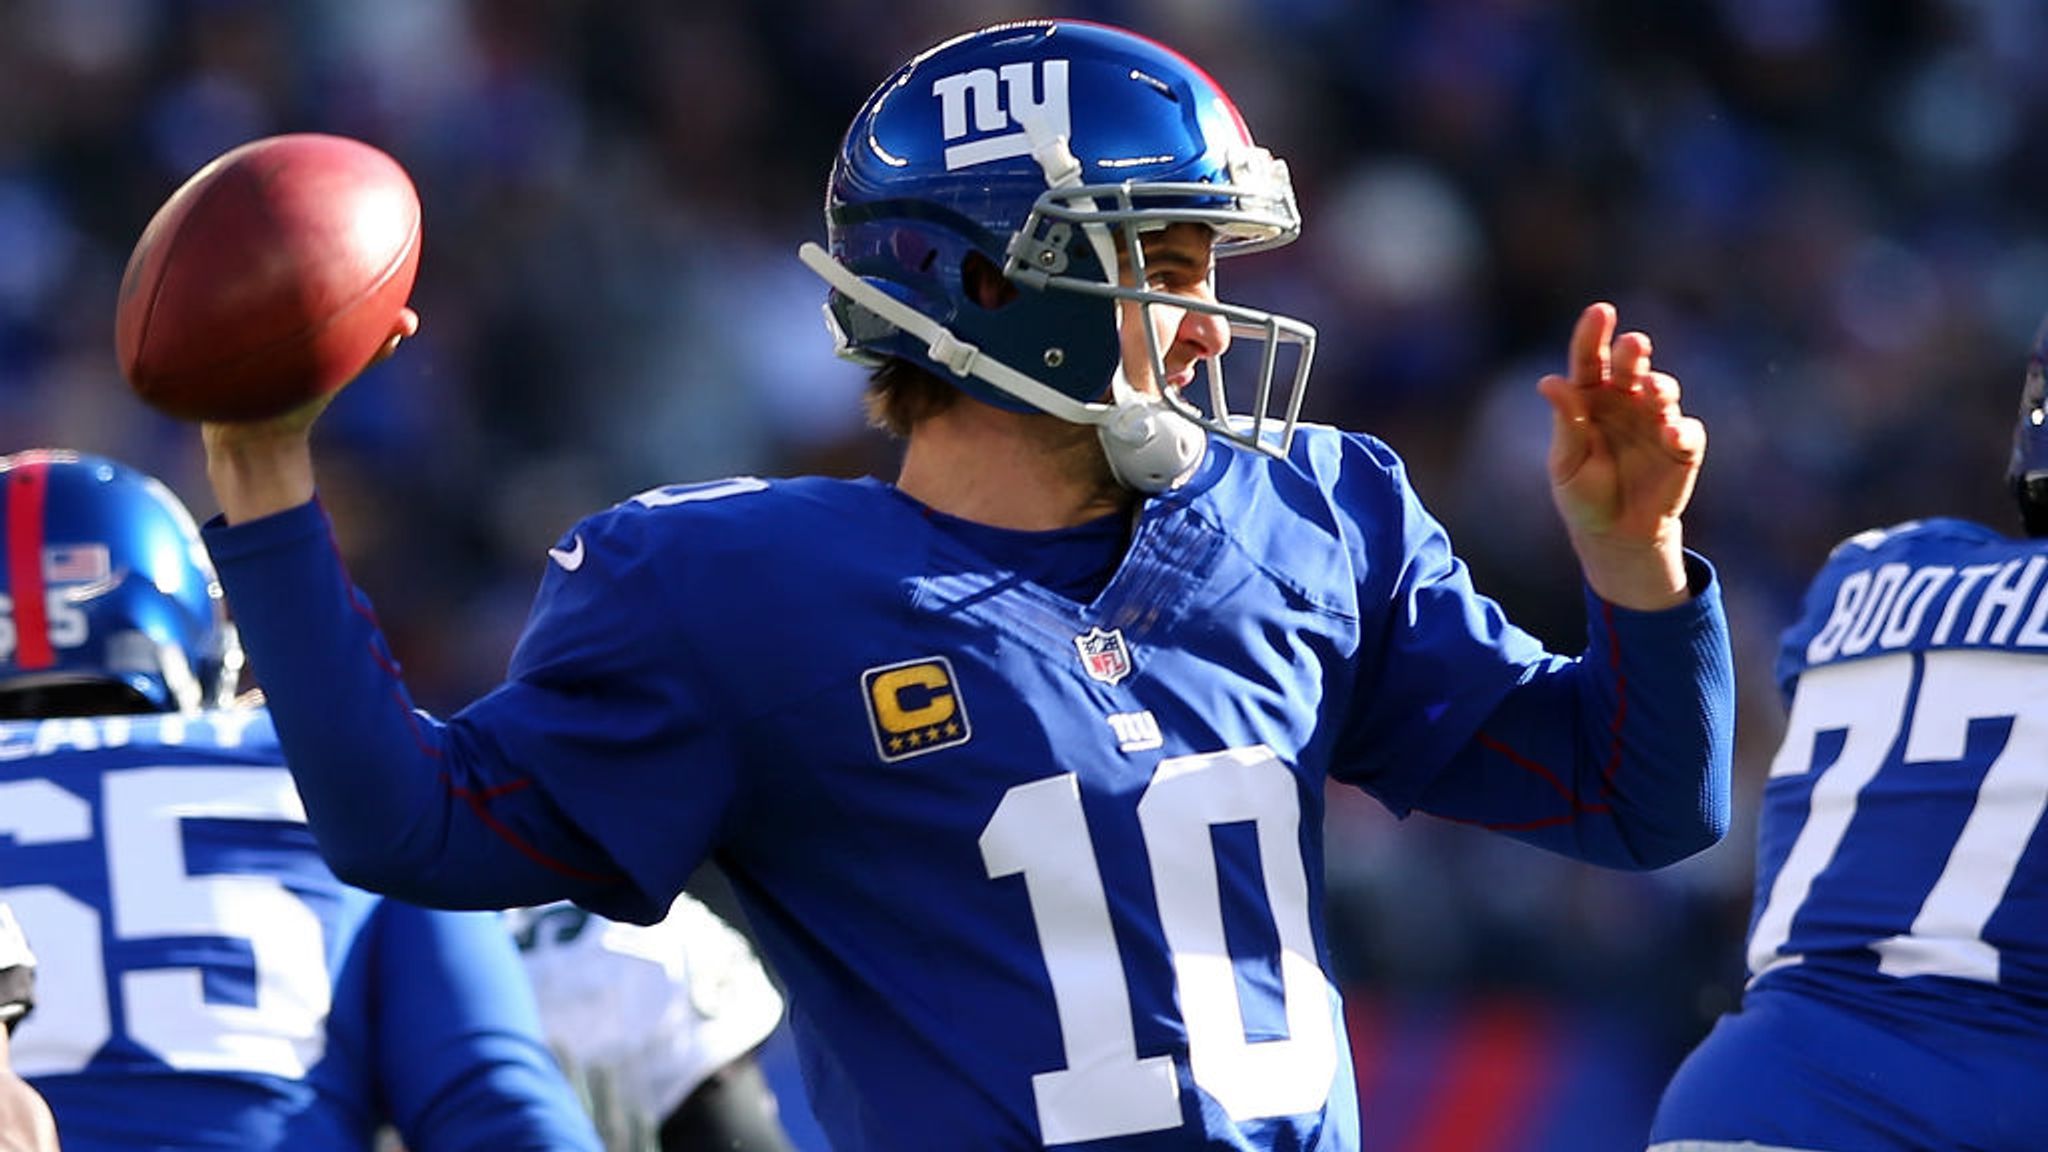 NFL: New York Giants miss out on play-offs despite beating